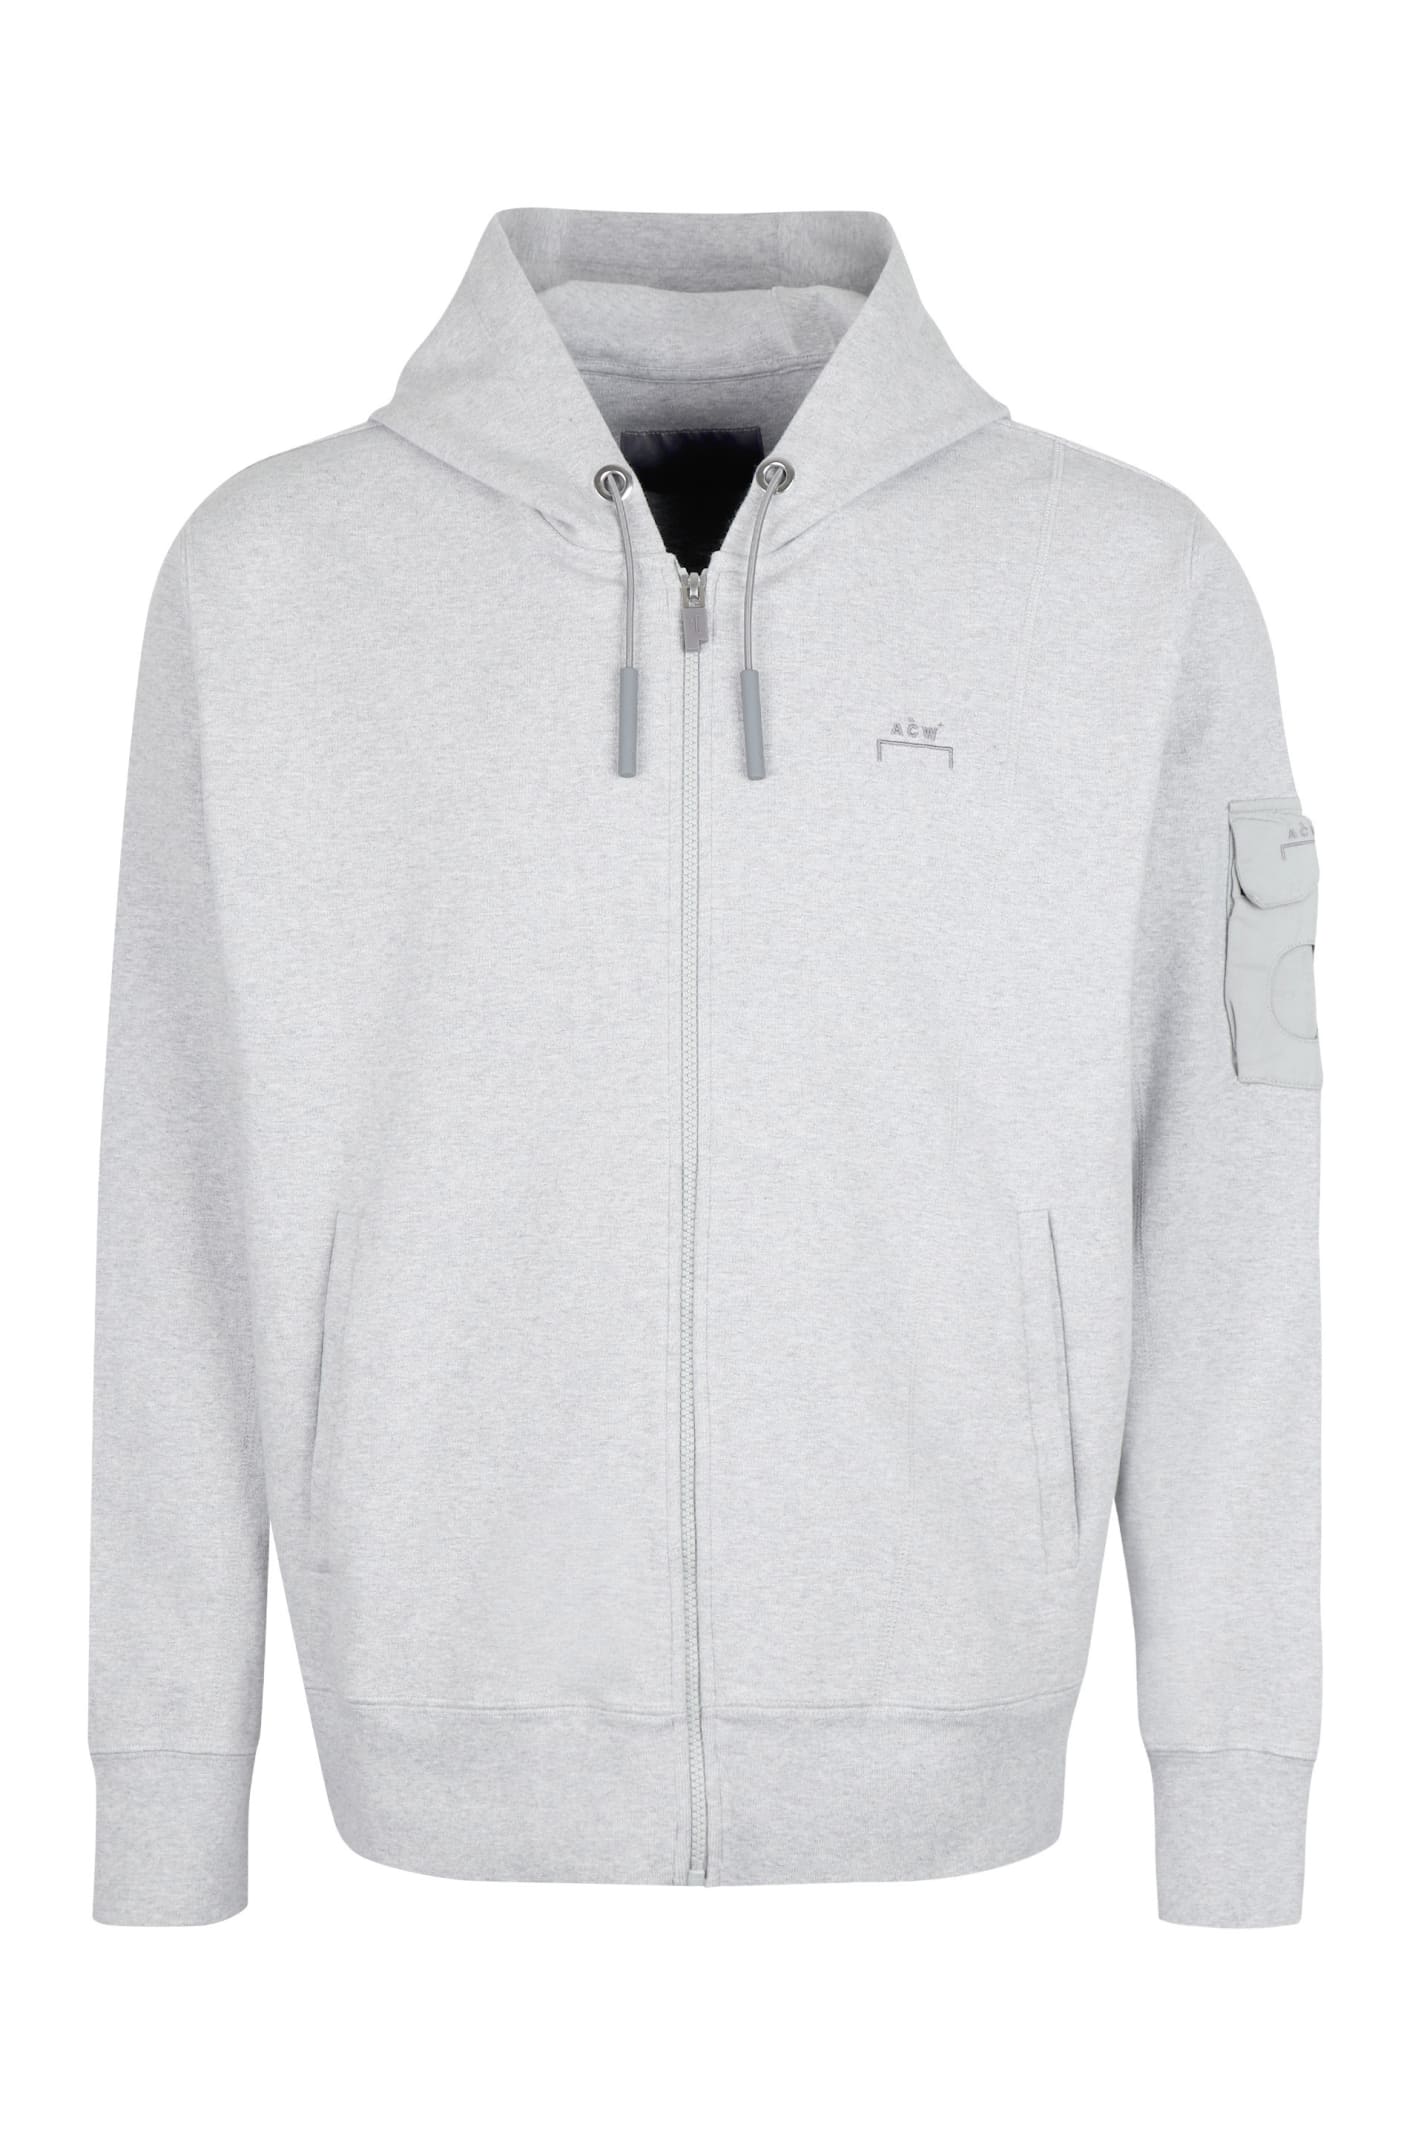 A-COLD-WALL Full Zip Hoodie